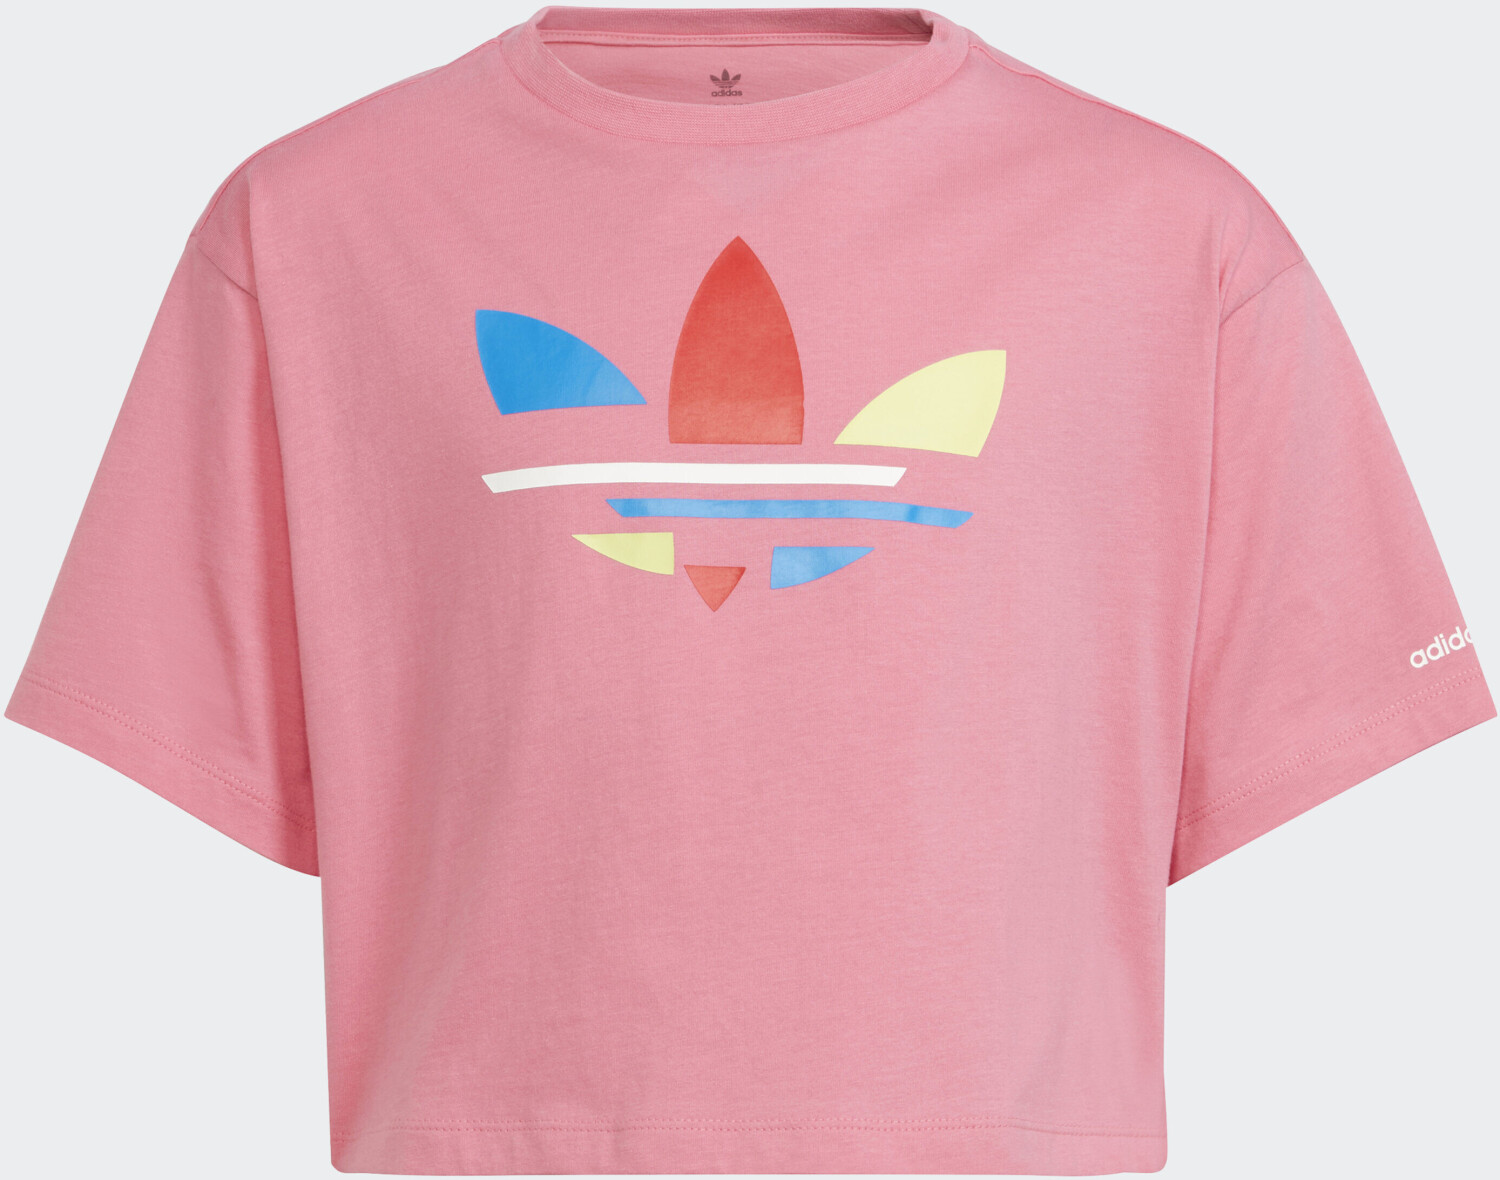 Buy Adidas Originals Cropped T-Shirt Girl pink from £7.99 (Today ...